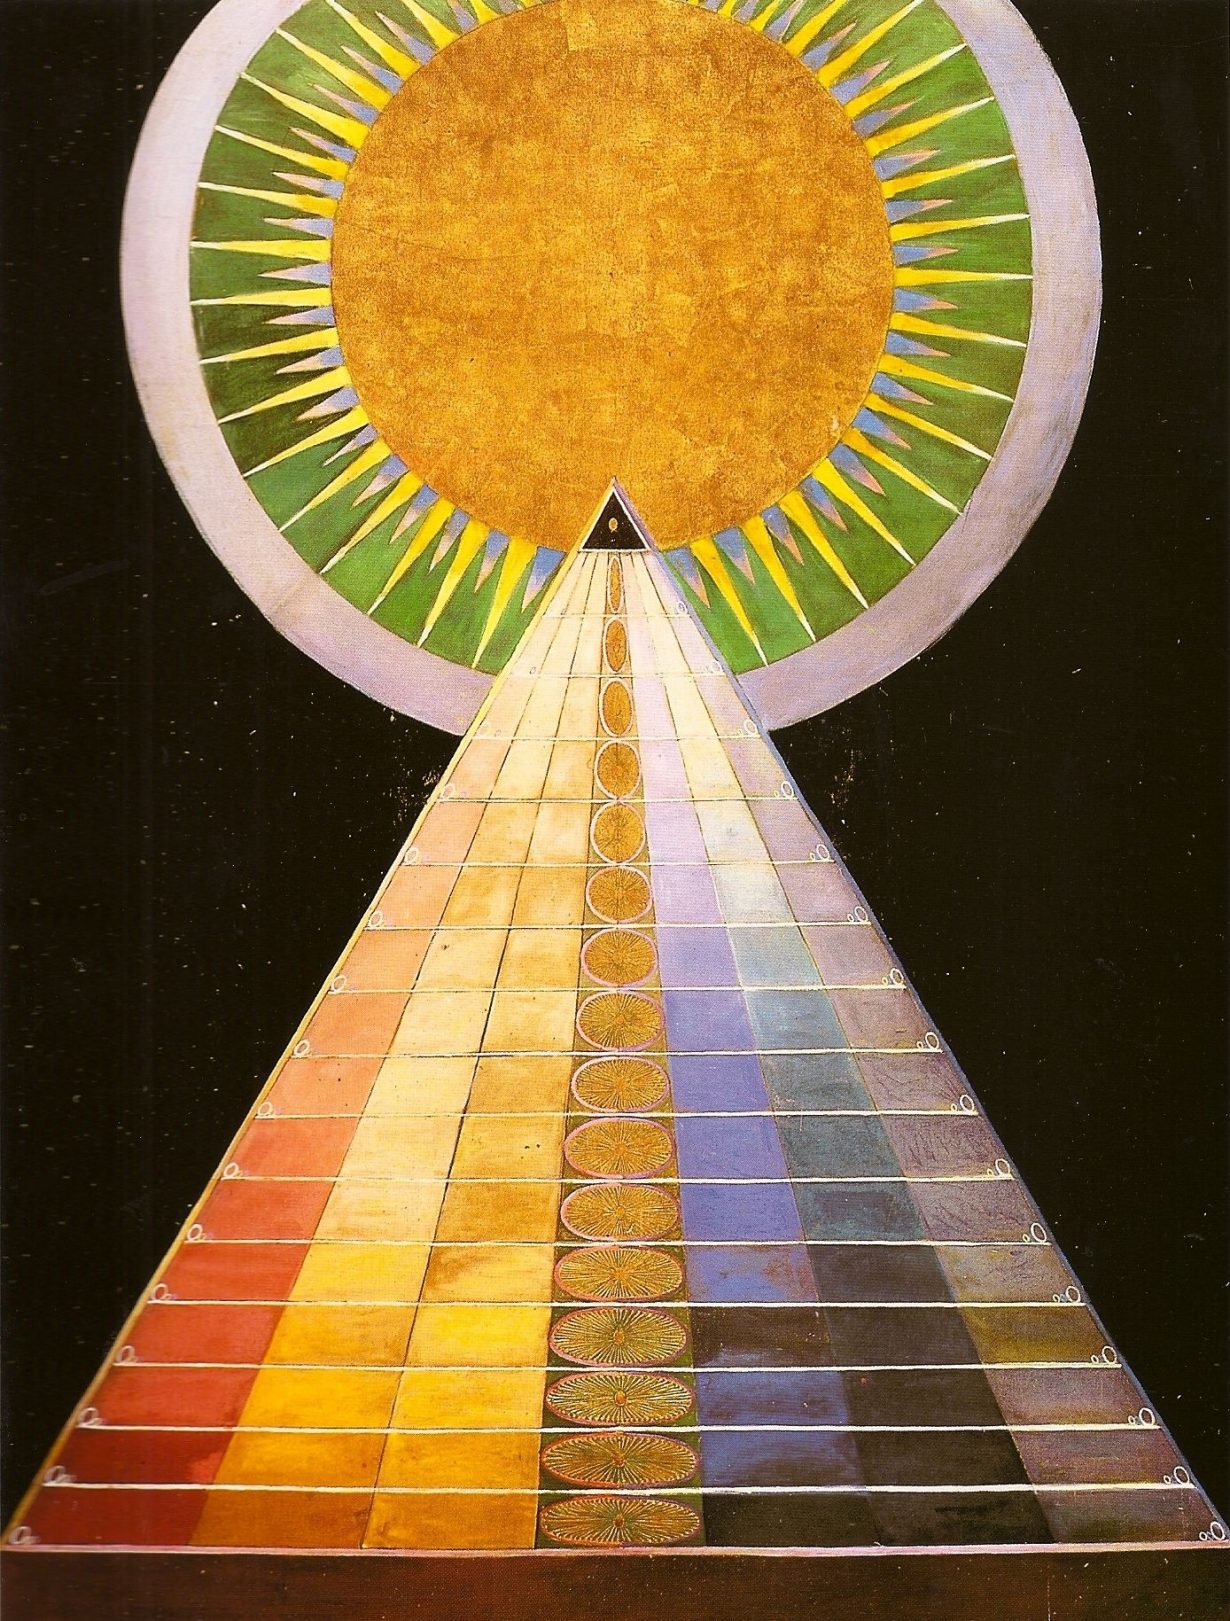 Great Critics and their ideas: Hilma Af Klint - ArtReview